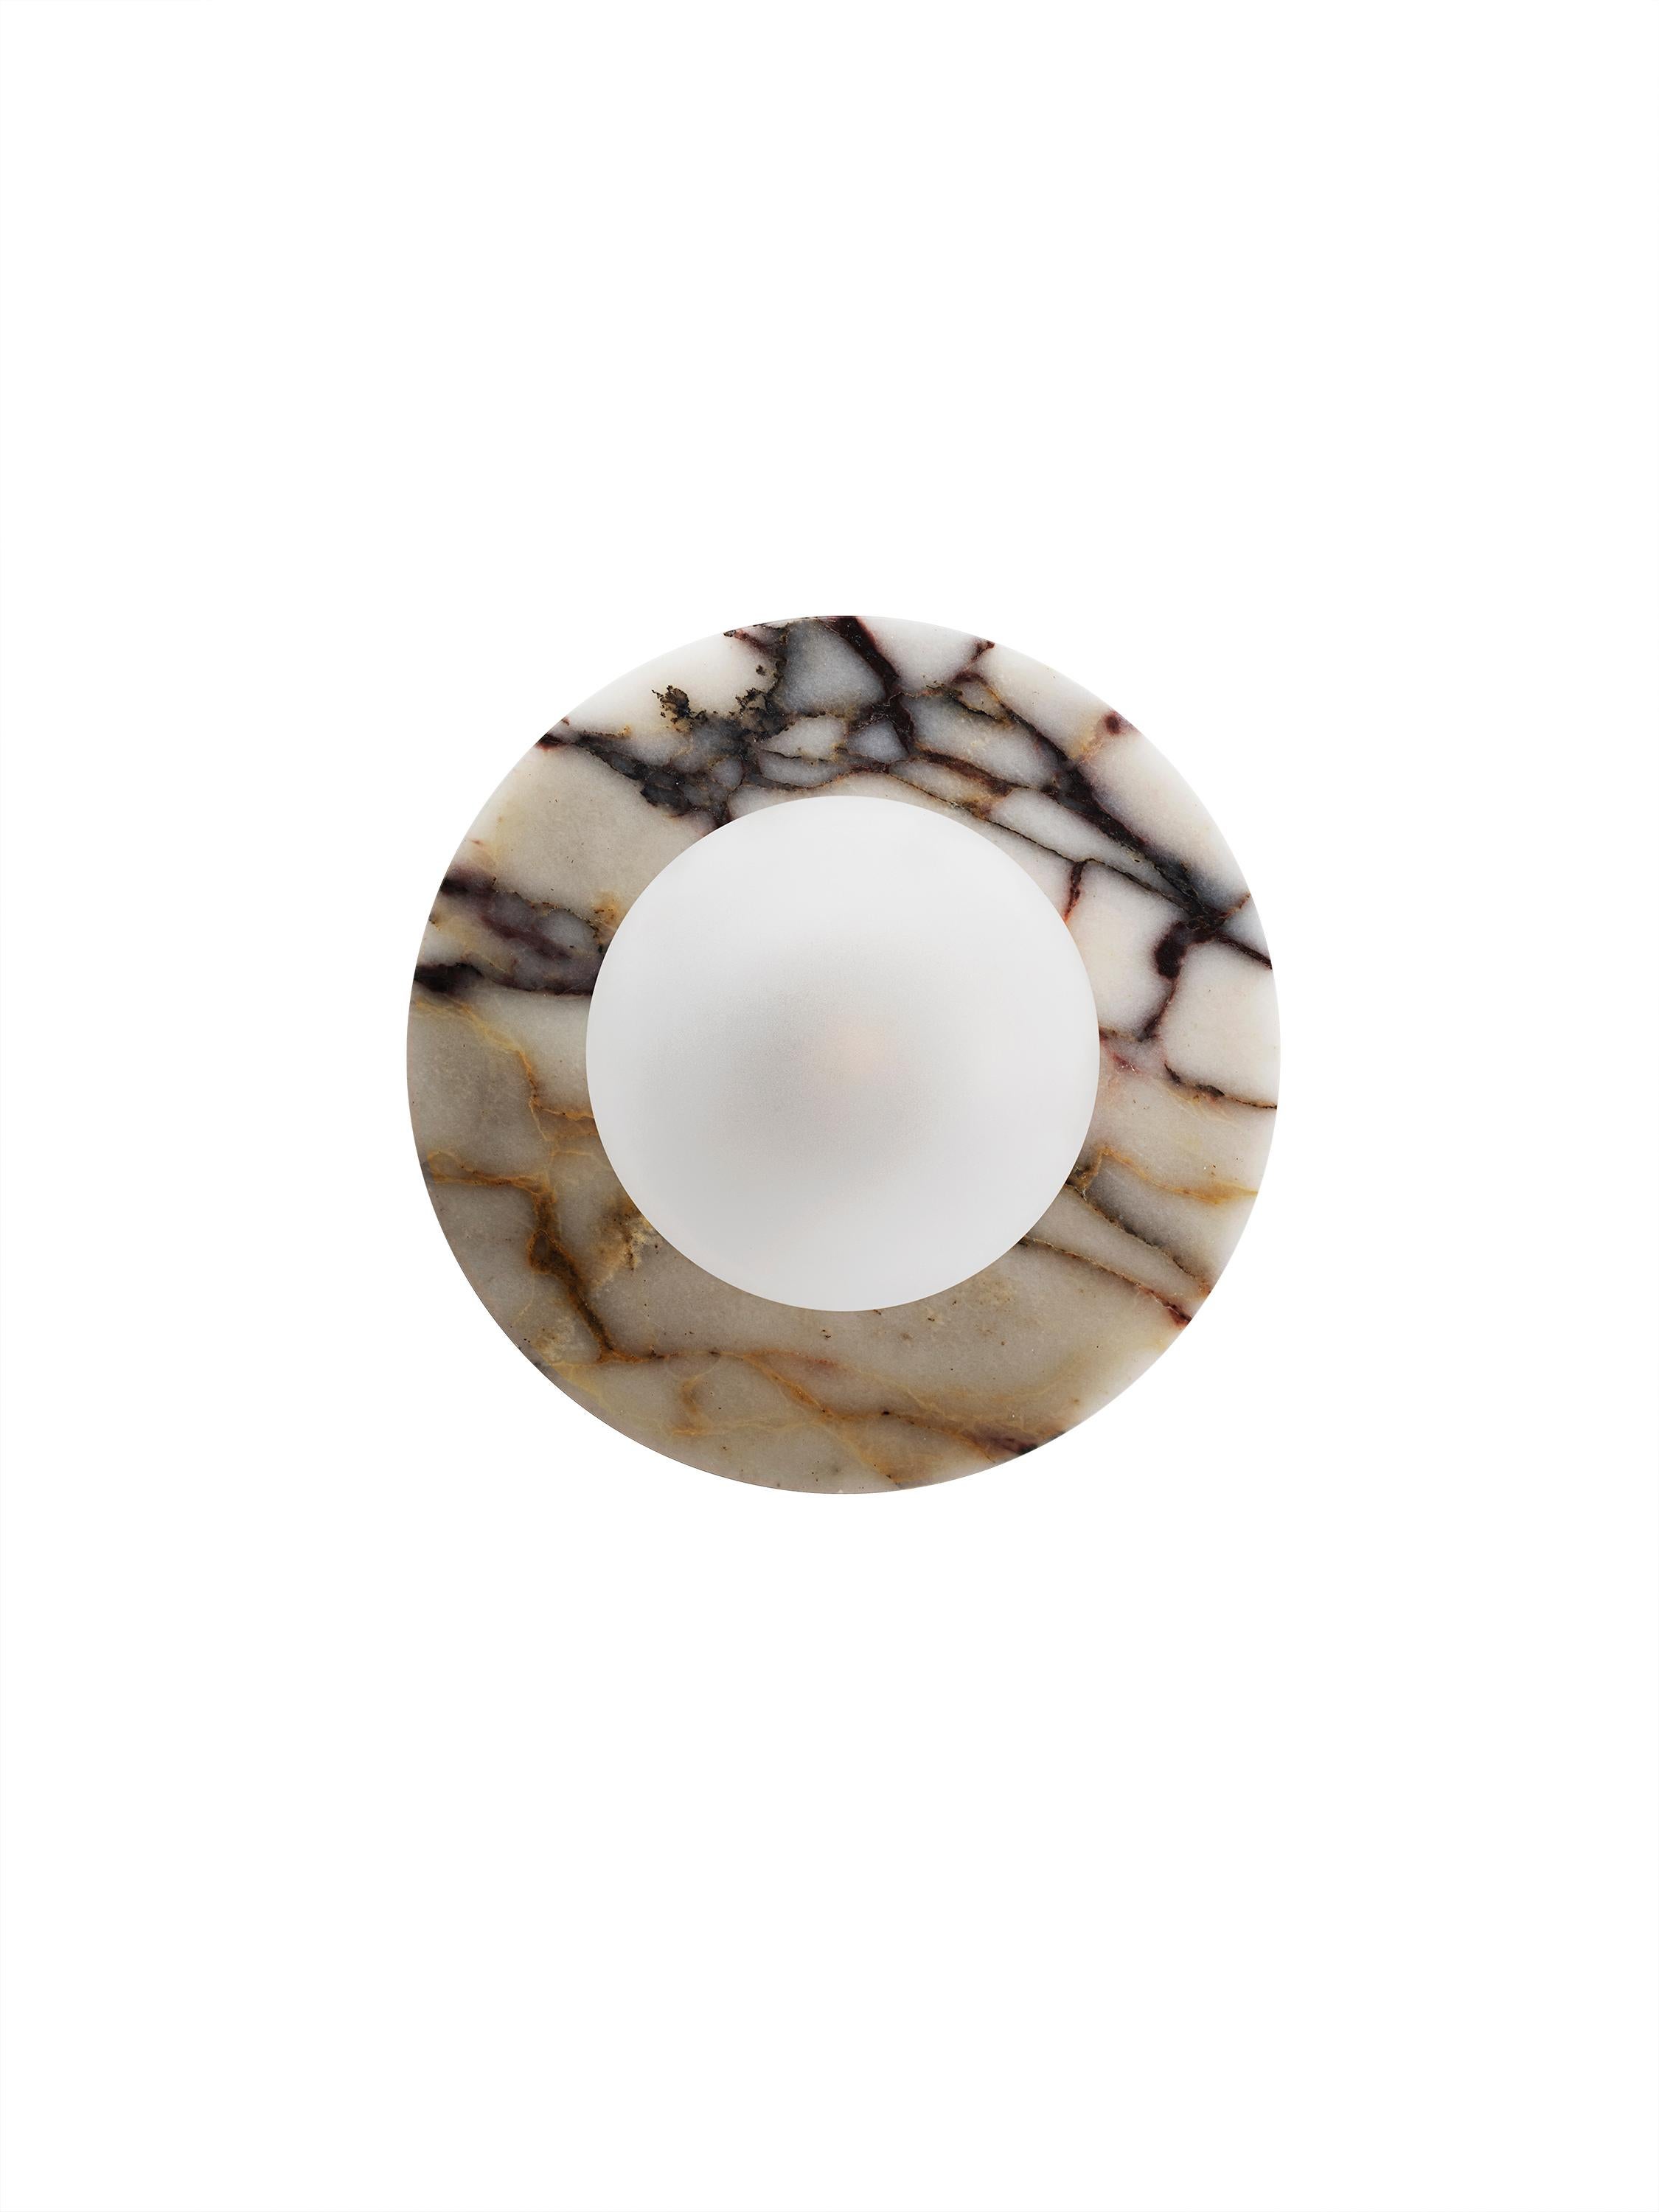 American LUCIE Calacatta Marble Flushmount/Sconce Emily Del Bello x Blueprint Lighting  For Sale